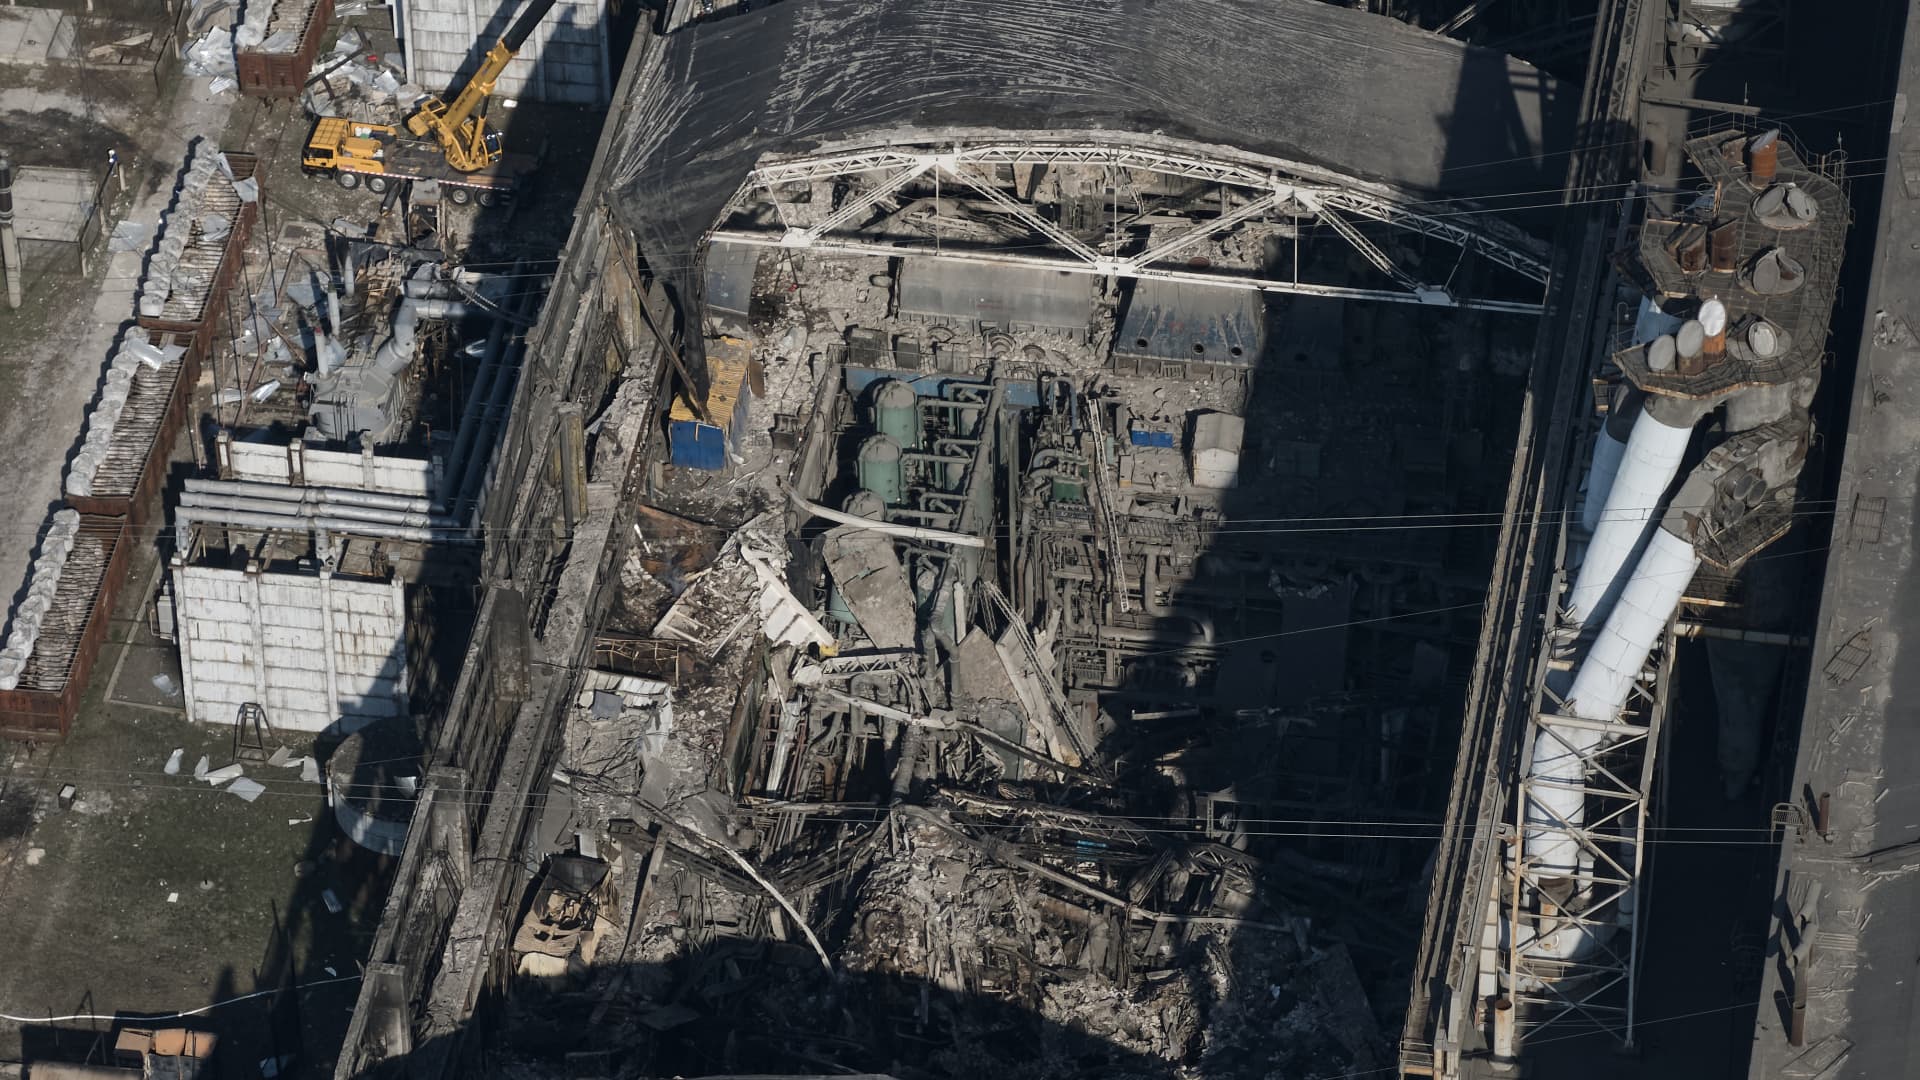 :An aerial view of the destroyed engine room of Trypilska Thermal Power Plant (TPP) after rocket fire on April 11, 2024 in Ukrainka, Kiev district, Ukraine. After a Russian missile attack on Thursday night, Trypilska Thermal Power Plant (TPP), Ukraine's largest power-generating plant in the Kyiv region, was reported completely destroyed. It supplied electricity to the regions of Kyiv, Cherkasy, and Zhytomyr. No power cuts occurred in Kyiv or other supplied regions. Trypilska TPP was a 1800 MW thermal power station in Kyiv Oblast, Ukraine, built by the USSR in 1969 and completed in 1977. During the Russian invasion of Ukraine, the station was permanently disabled on April 11, 2024 after Russian missiles set fire to the main turbine hall. (Photo by Kostiantyn Liberov/Libkos/Getty Images)